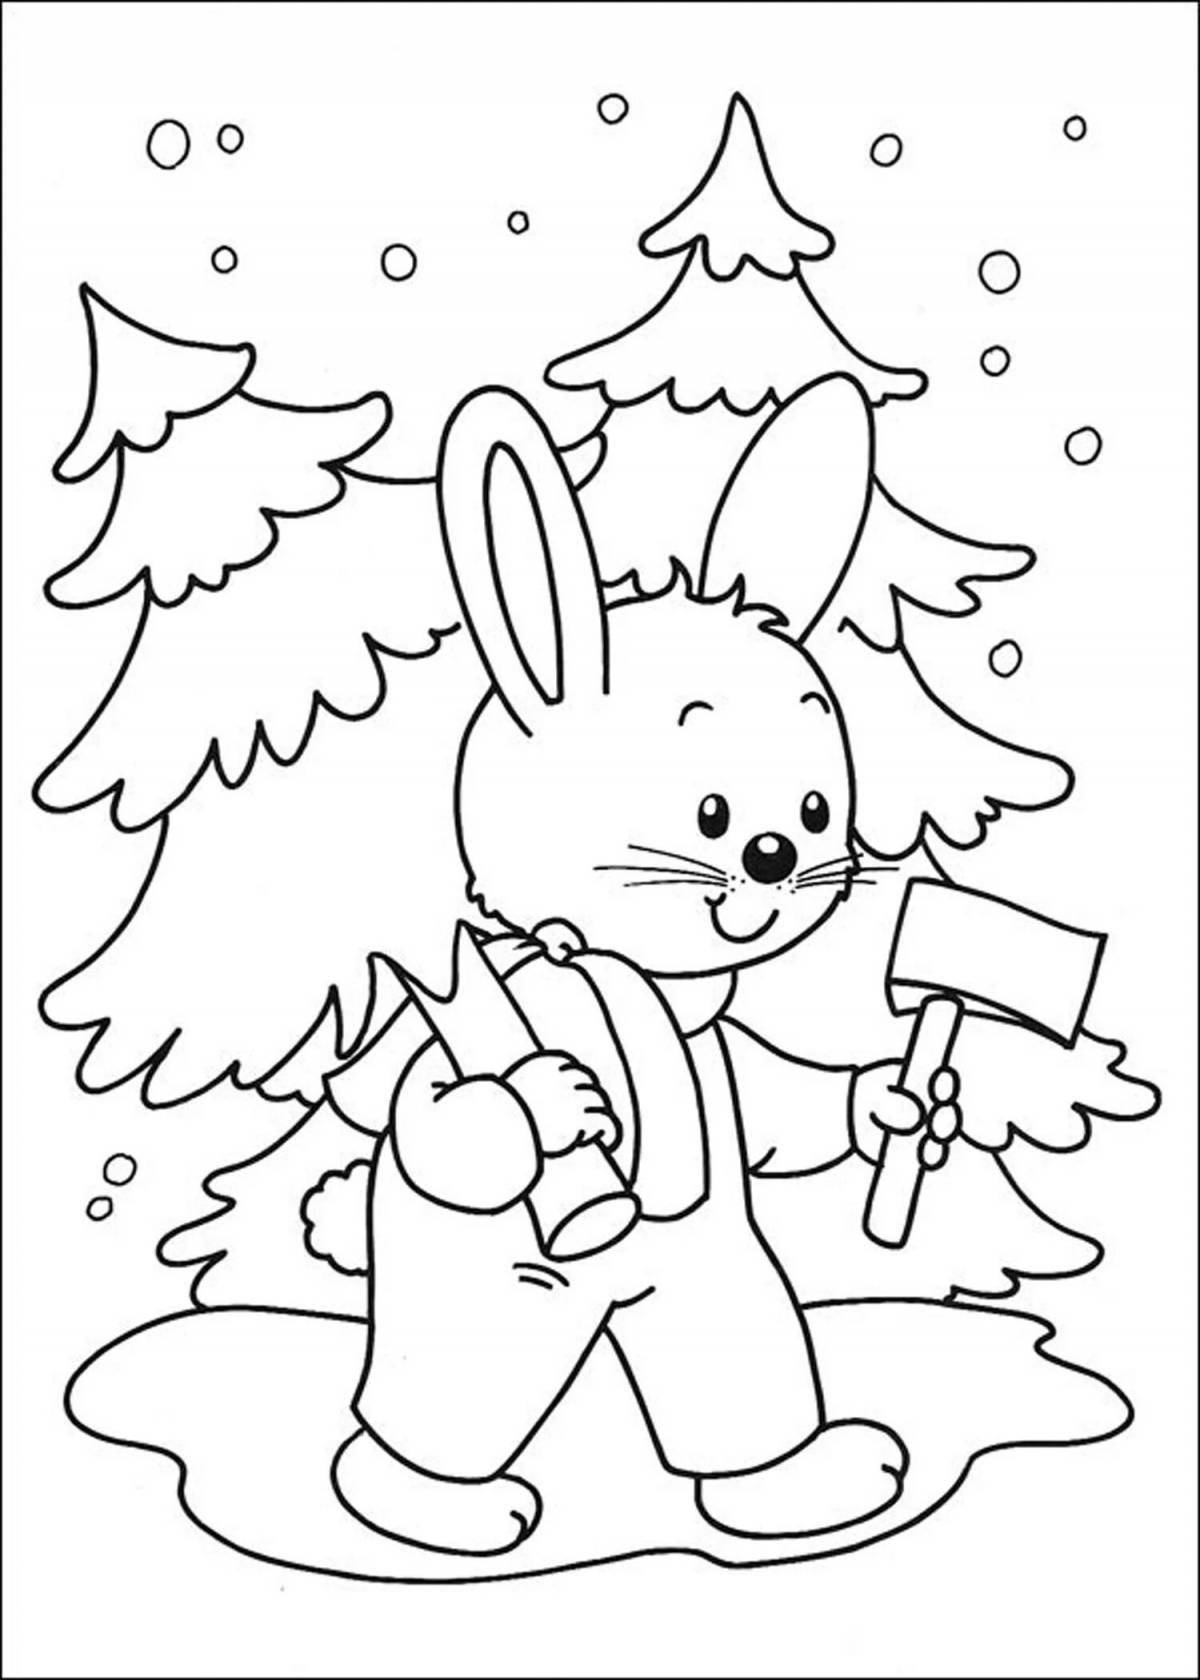 Sparkling coloring rabbit new year